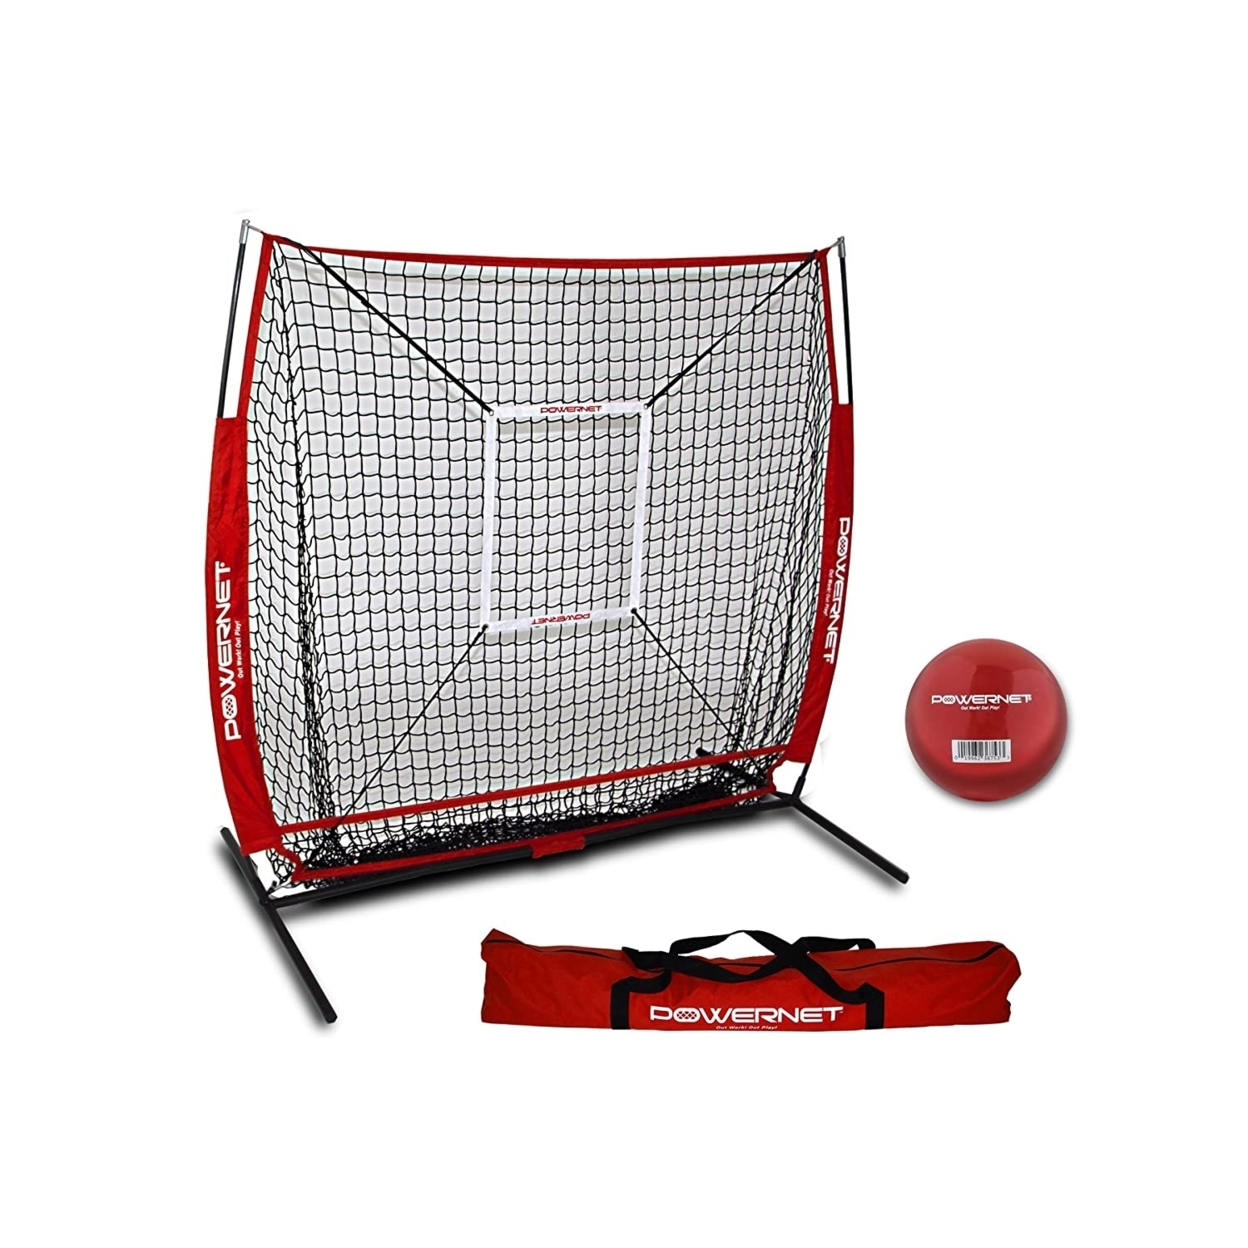 PowerNet 5x5 Practice Hitting Pitching Net + Strike Zone Attachment + Weighted Training Ball Bundle + Carry Bag - Black